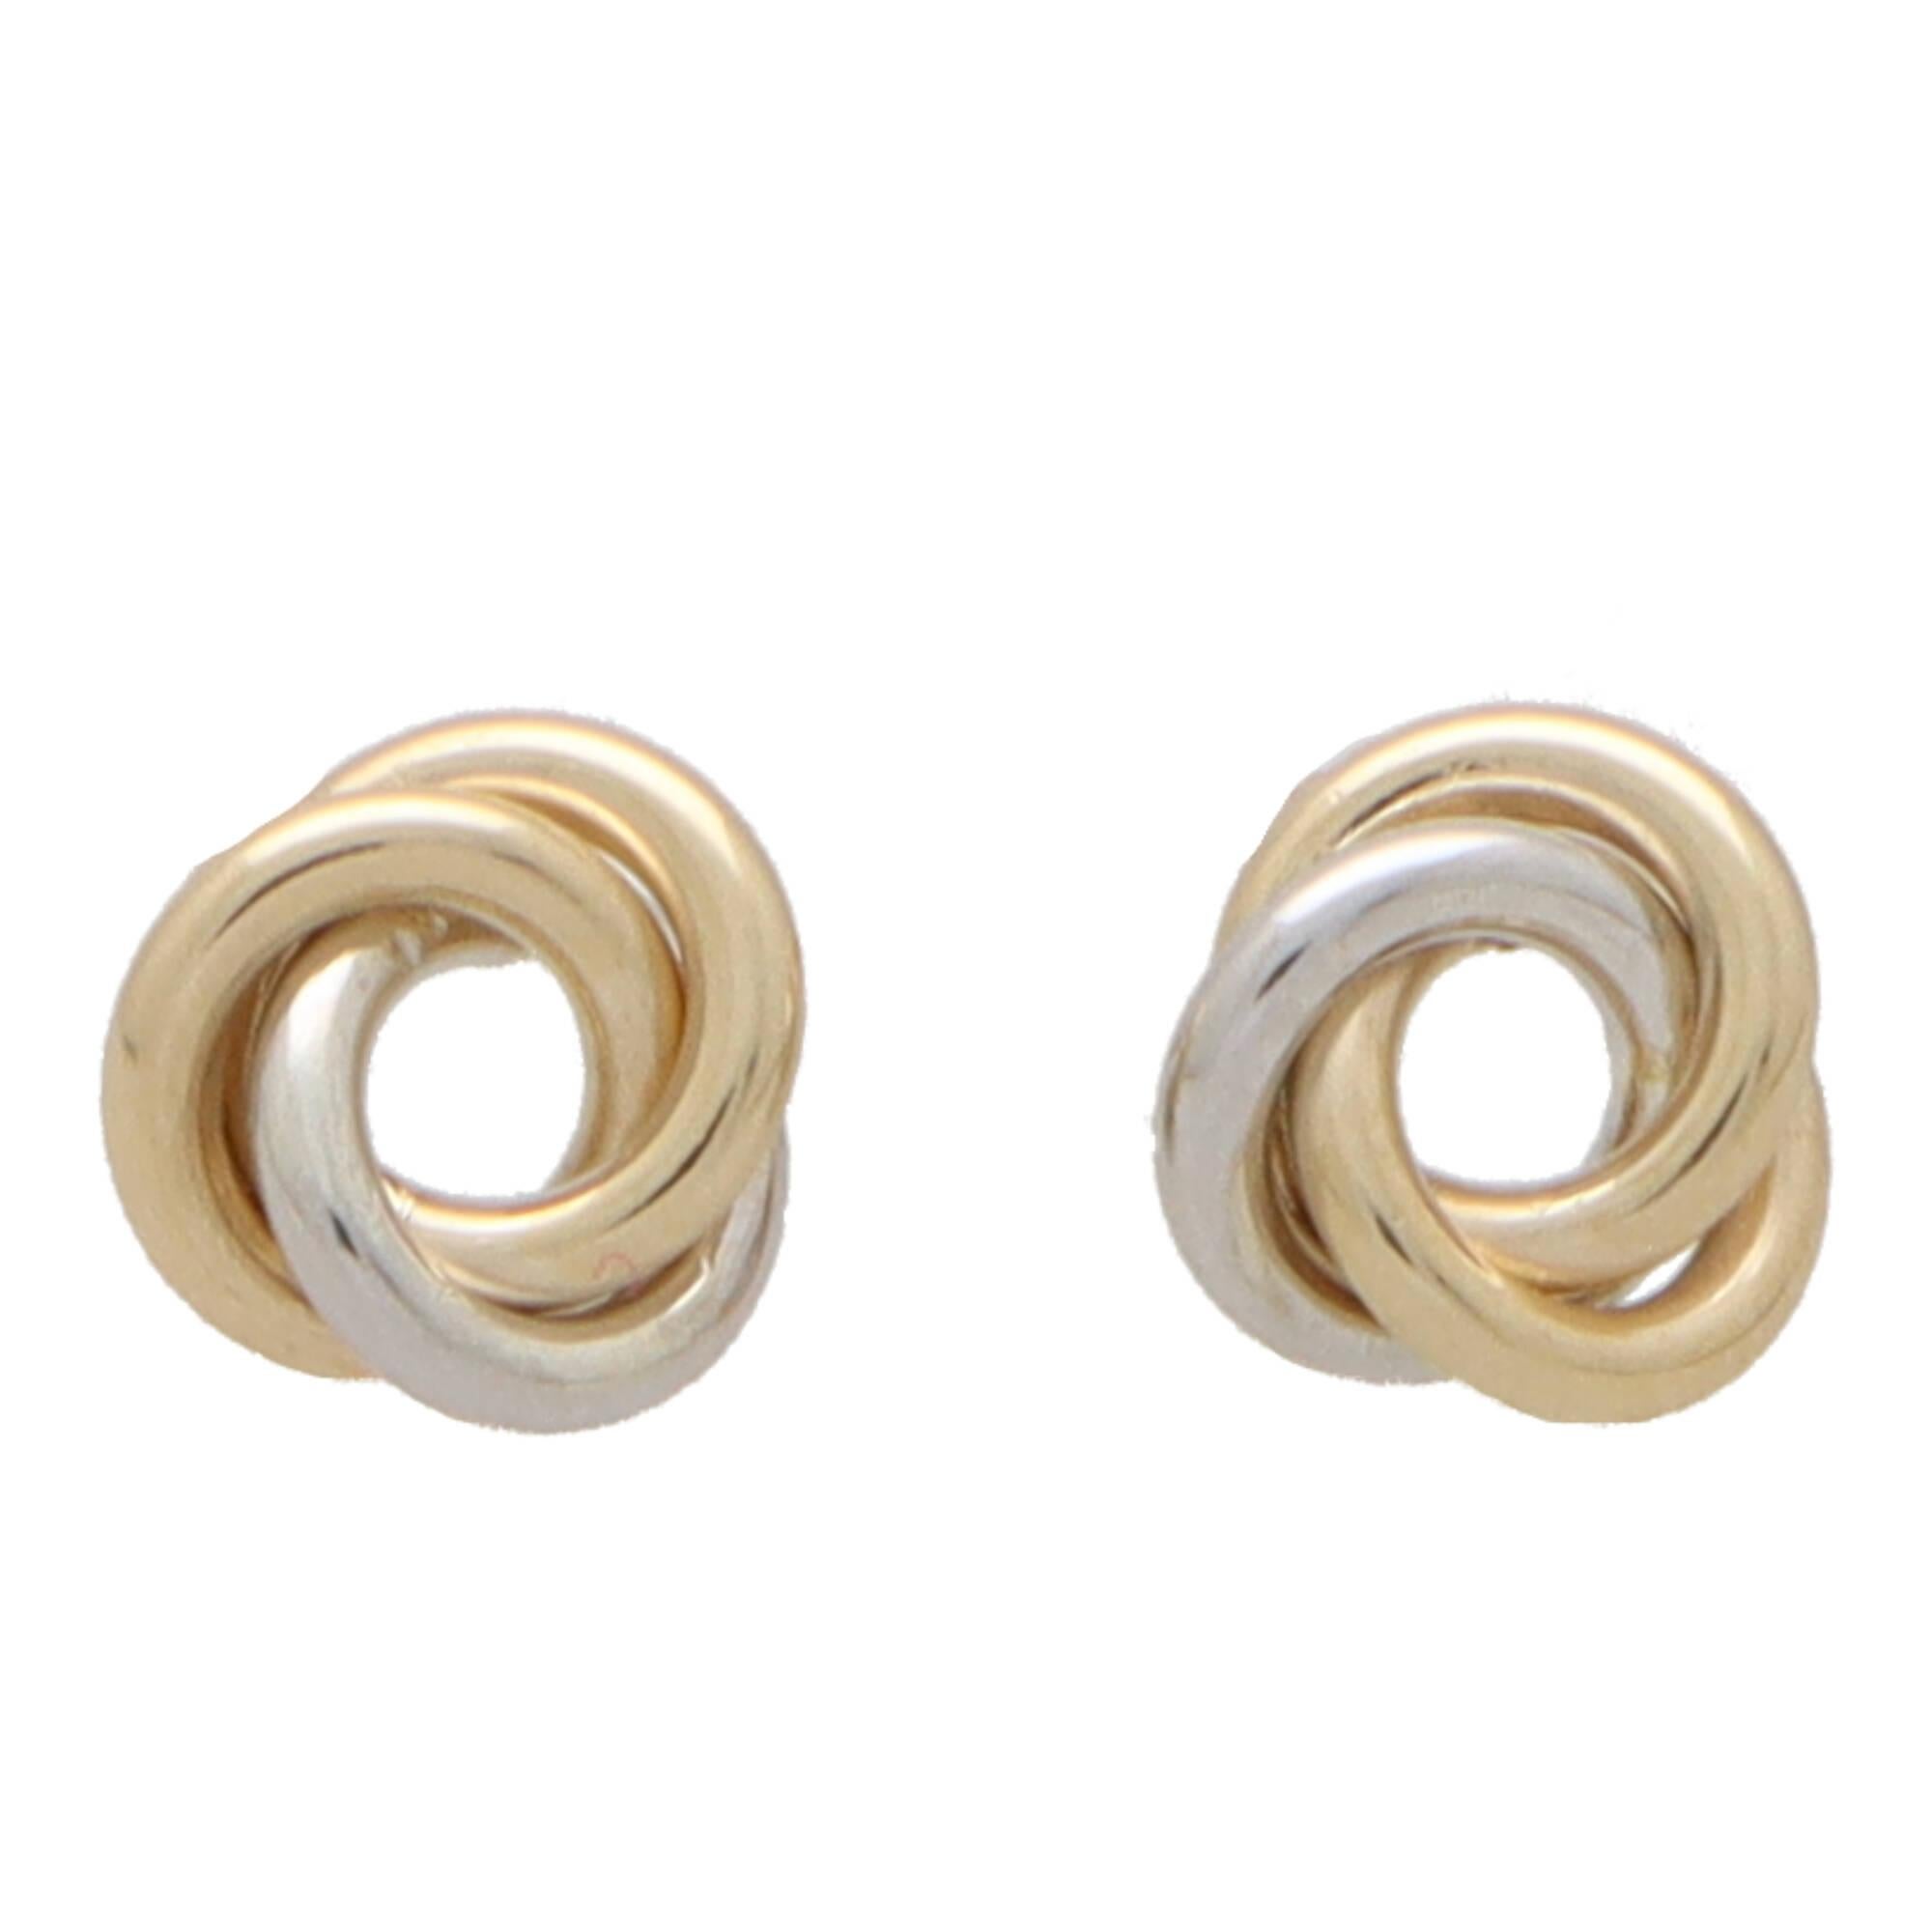  A lovely pair of vintage trinity stud earrings set in 9k yellow, rose and white gold.

Each earrings depicts and woven trinity knot and each are secured to reverse with a solid gold post and butterfly fitting.

Due to the design and size, these